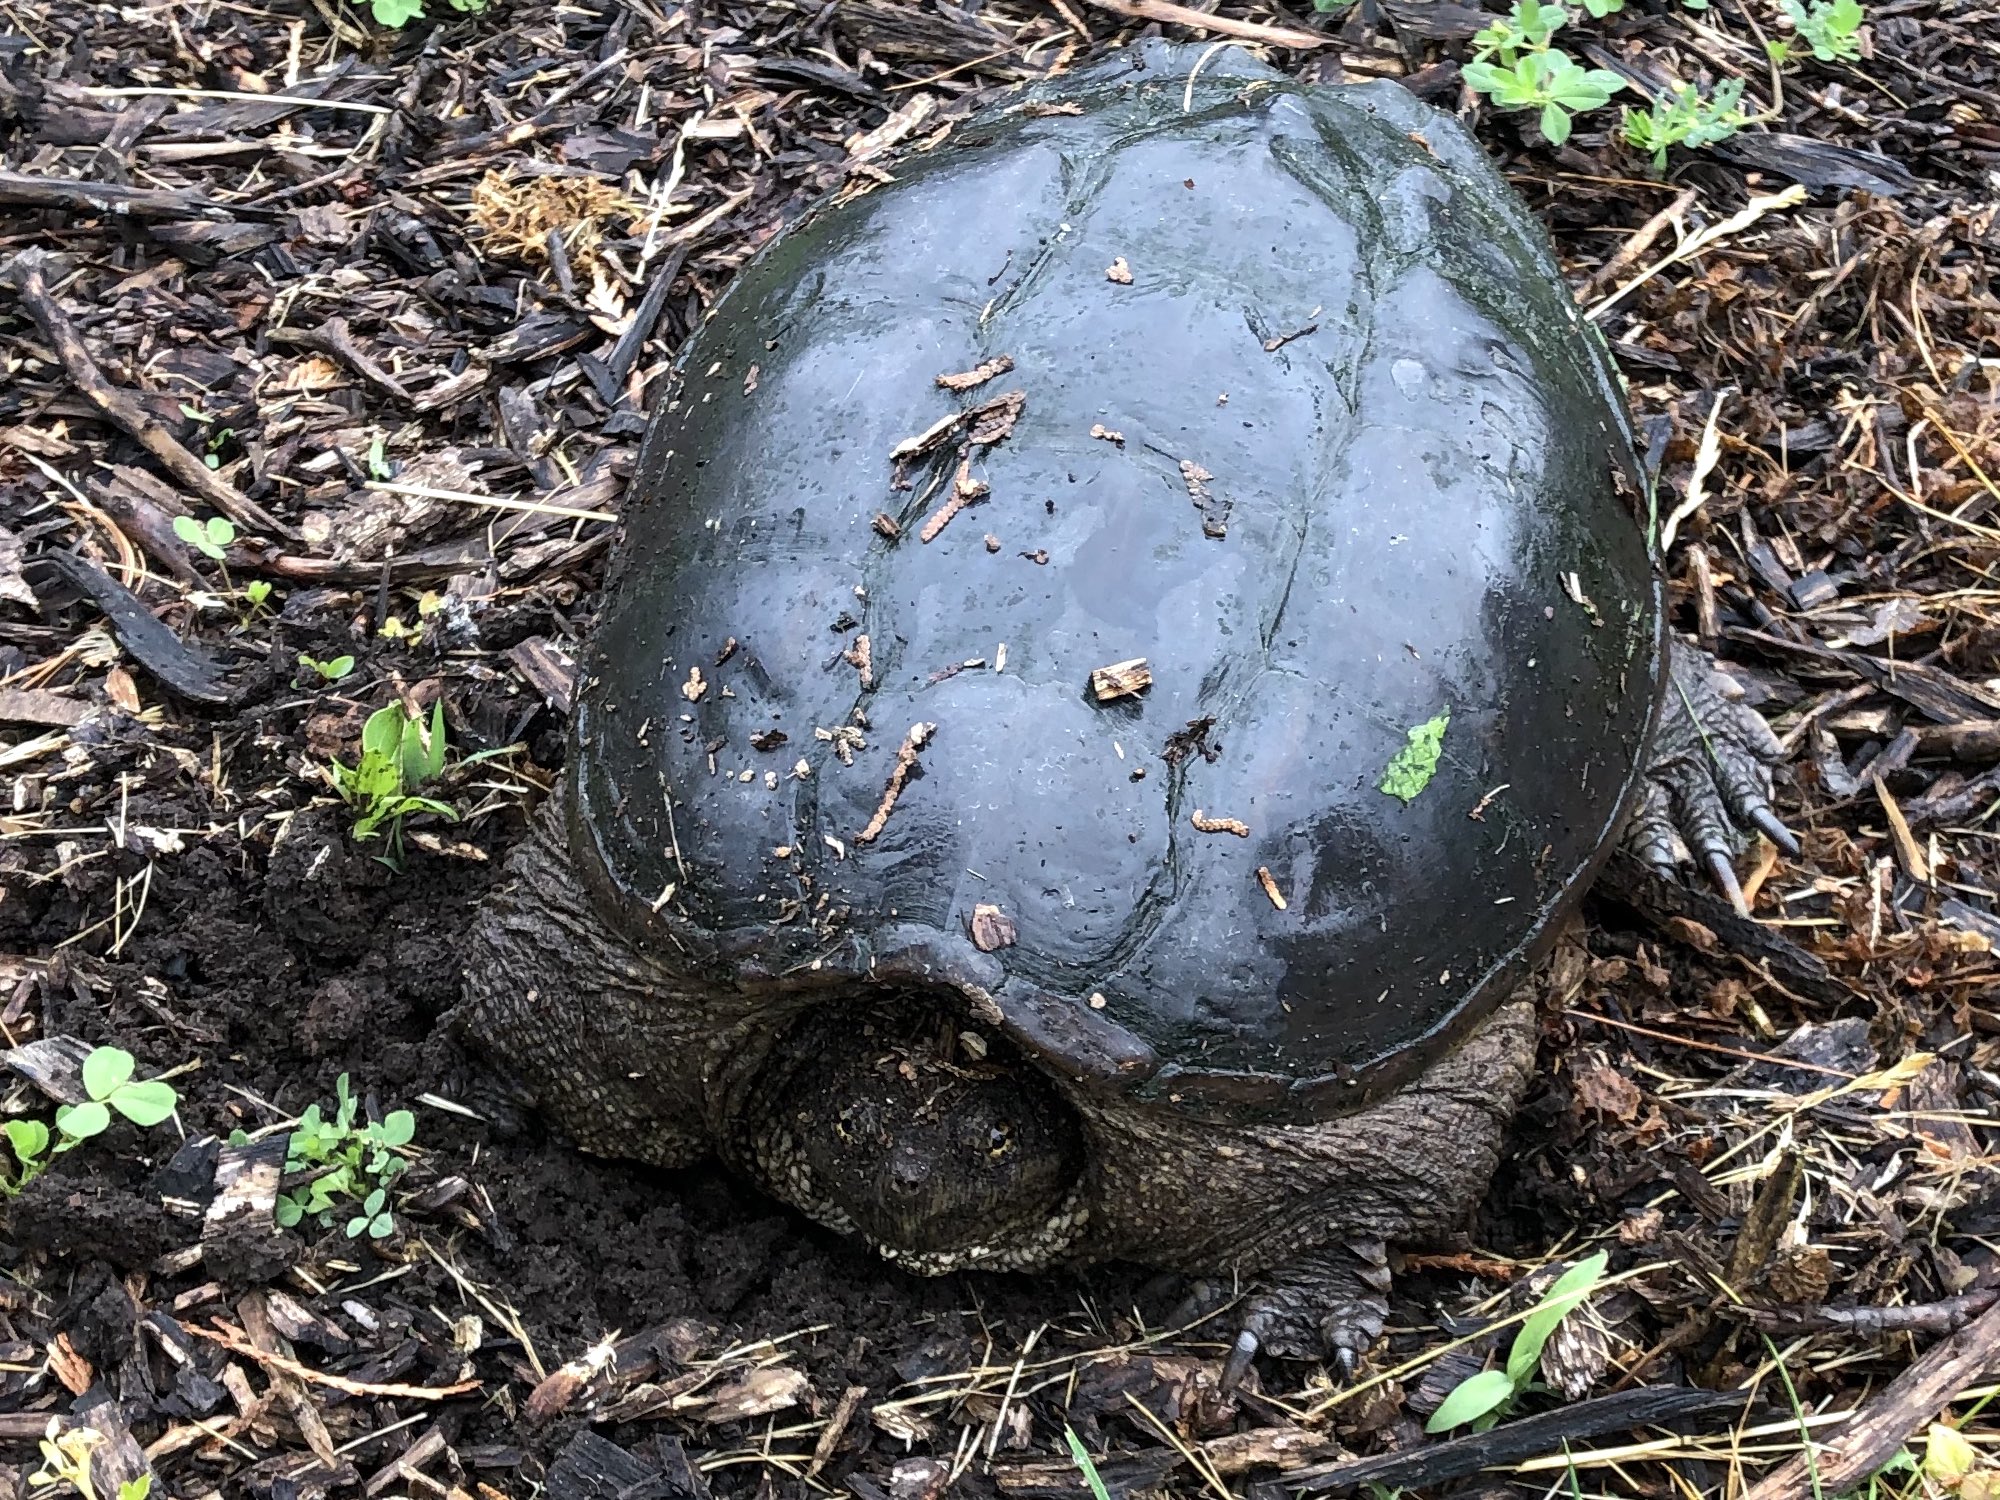 Snapping Turtle in E. Ray Stevens Pond and Aquatic Gardens on corner of Manitou Way and Nakoma Road in Madison, Wisconsin on June 12, 2019.